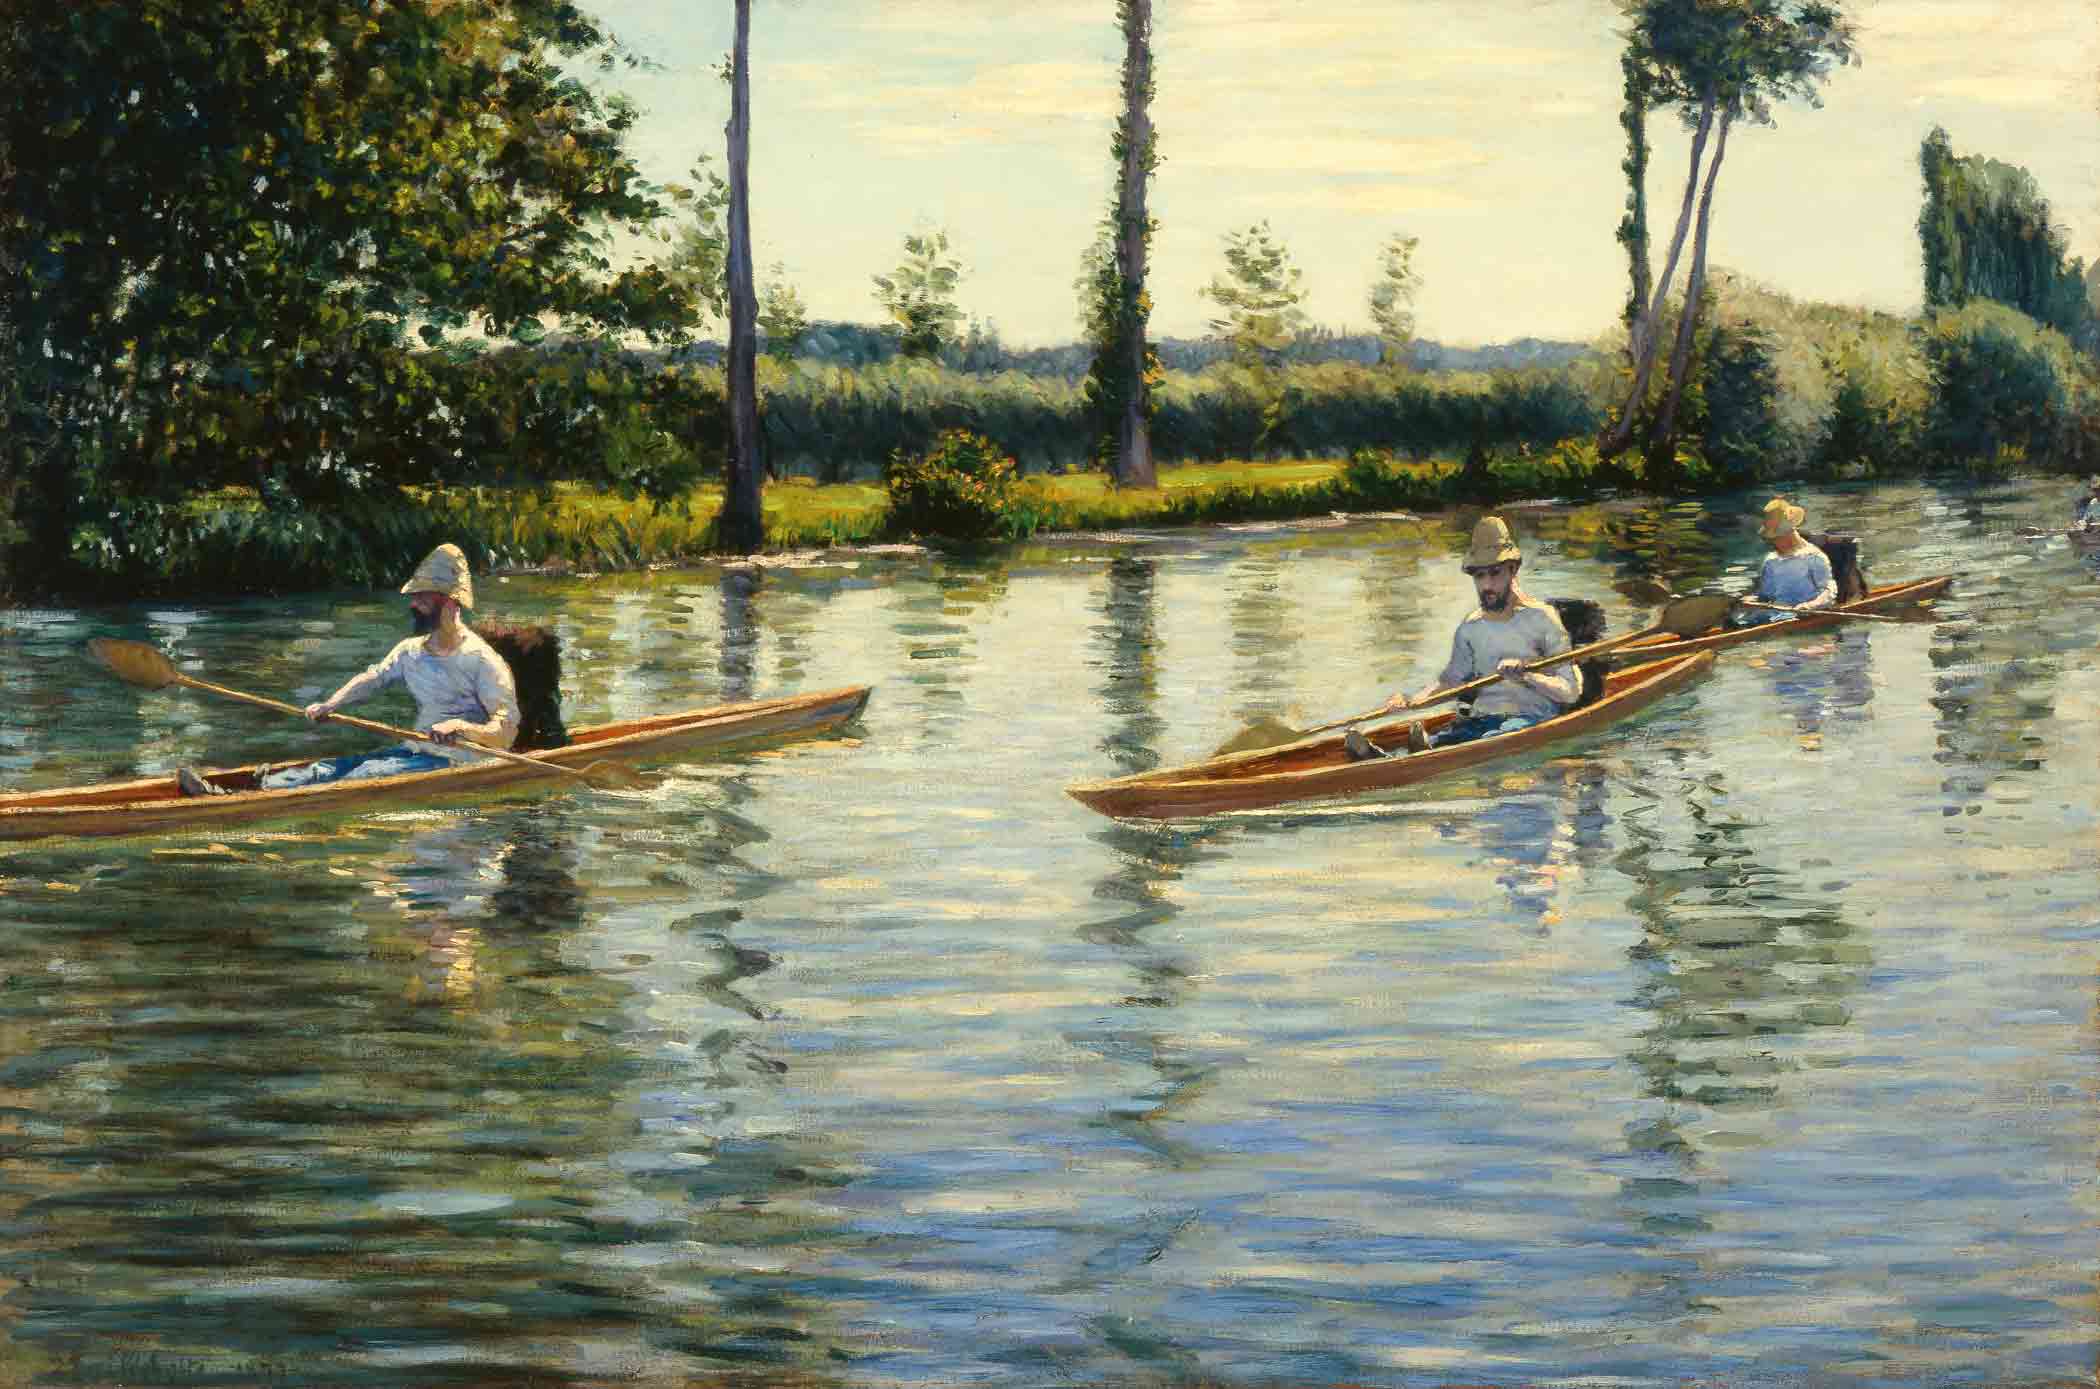 In barca sullo Yerres by Gustave Caillebotte - 1877 - 103,50 × 155,89 cm 